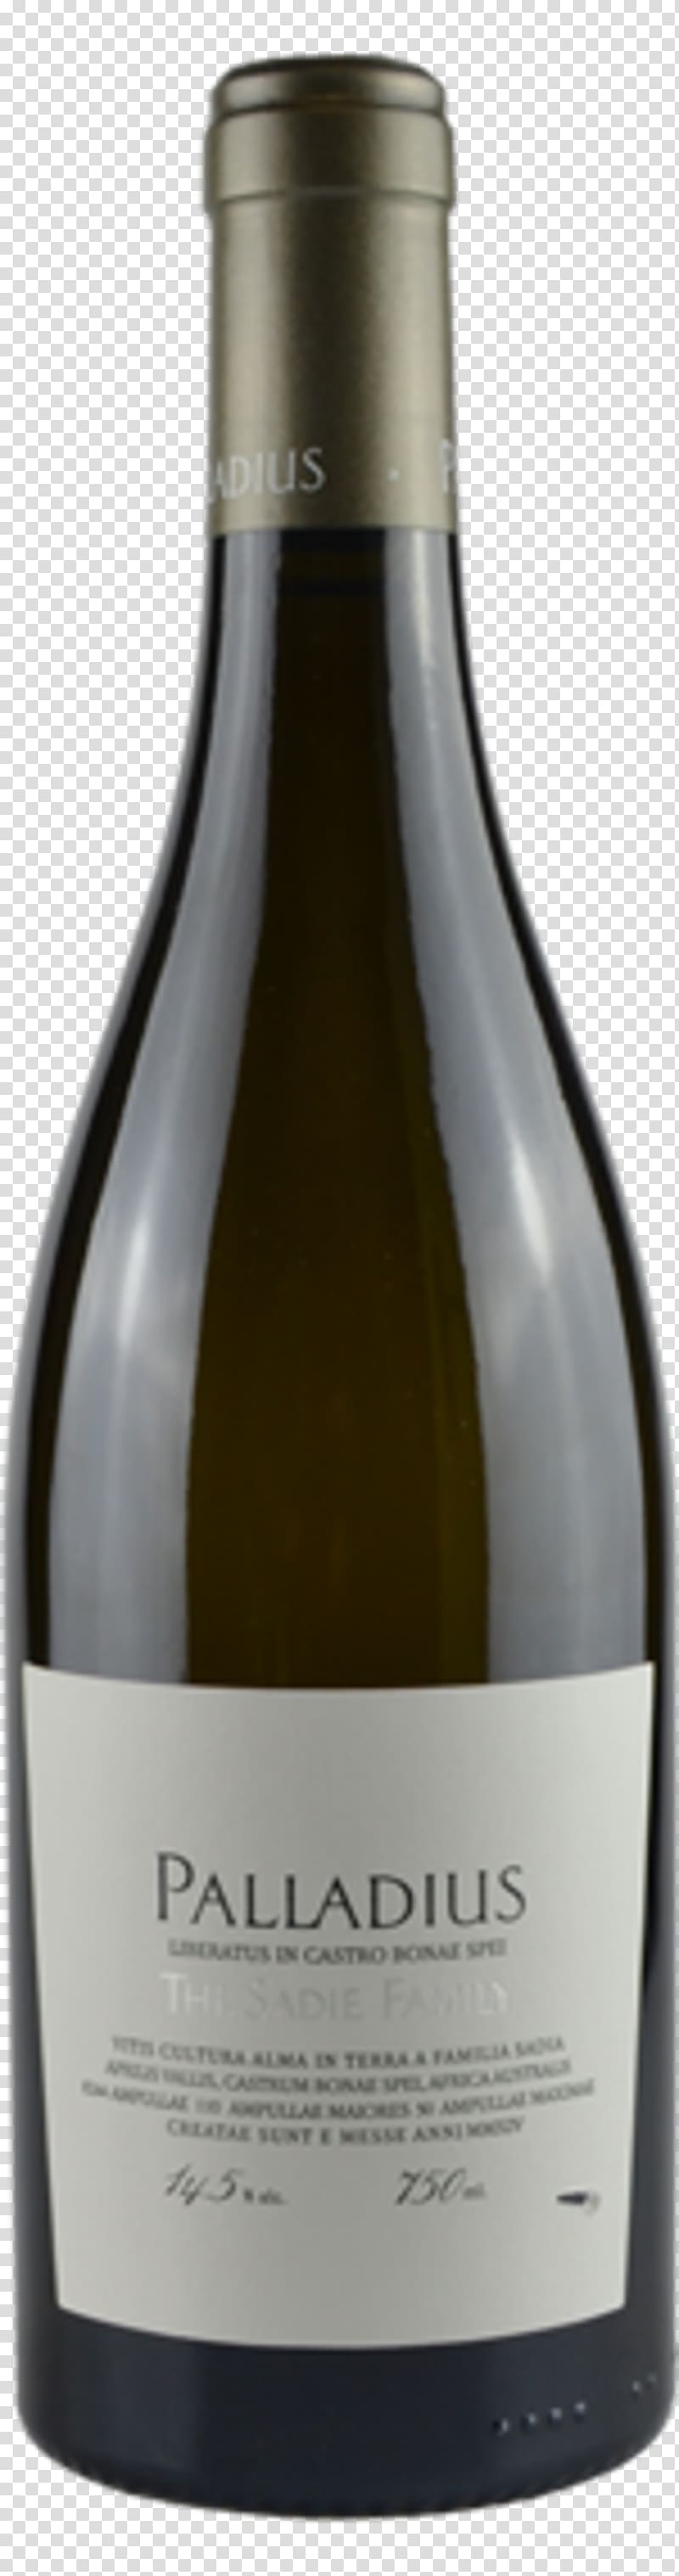 Champagne Wine Lobenbergs GUTE WEINE GmbH & Co. KG The Sadie Family Cuvée, champagne transparent background PNG clipart